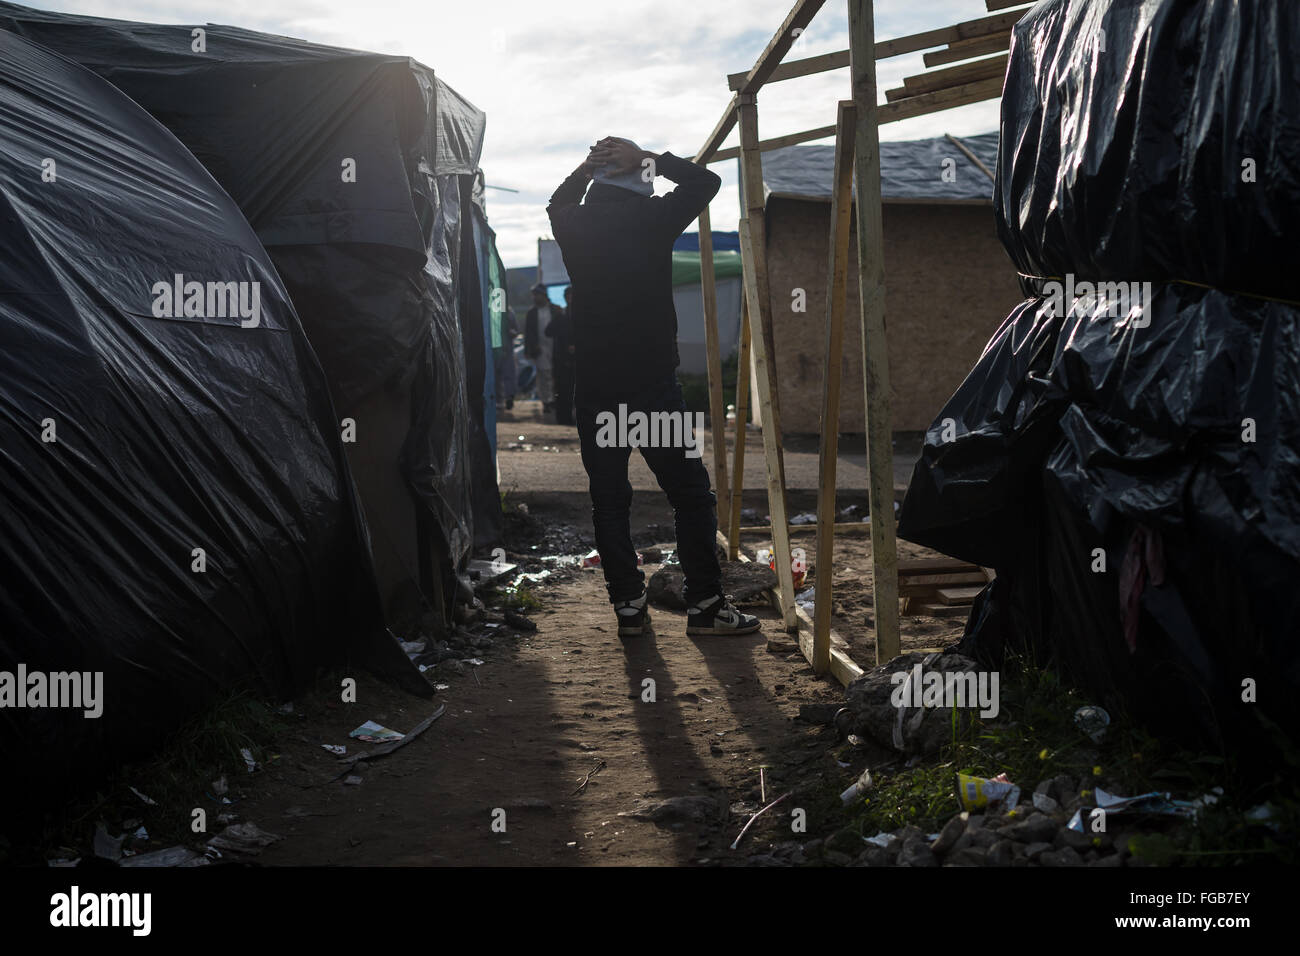 A man stands among makeshift shelters in the Jungle Refugee camp in Calais, France Stock Photo